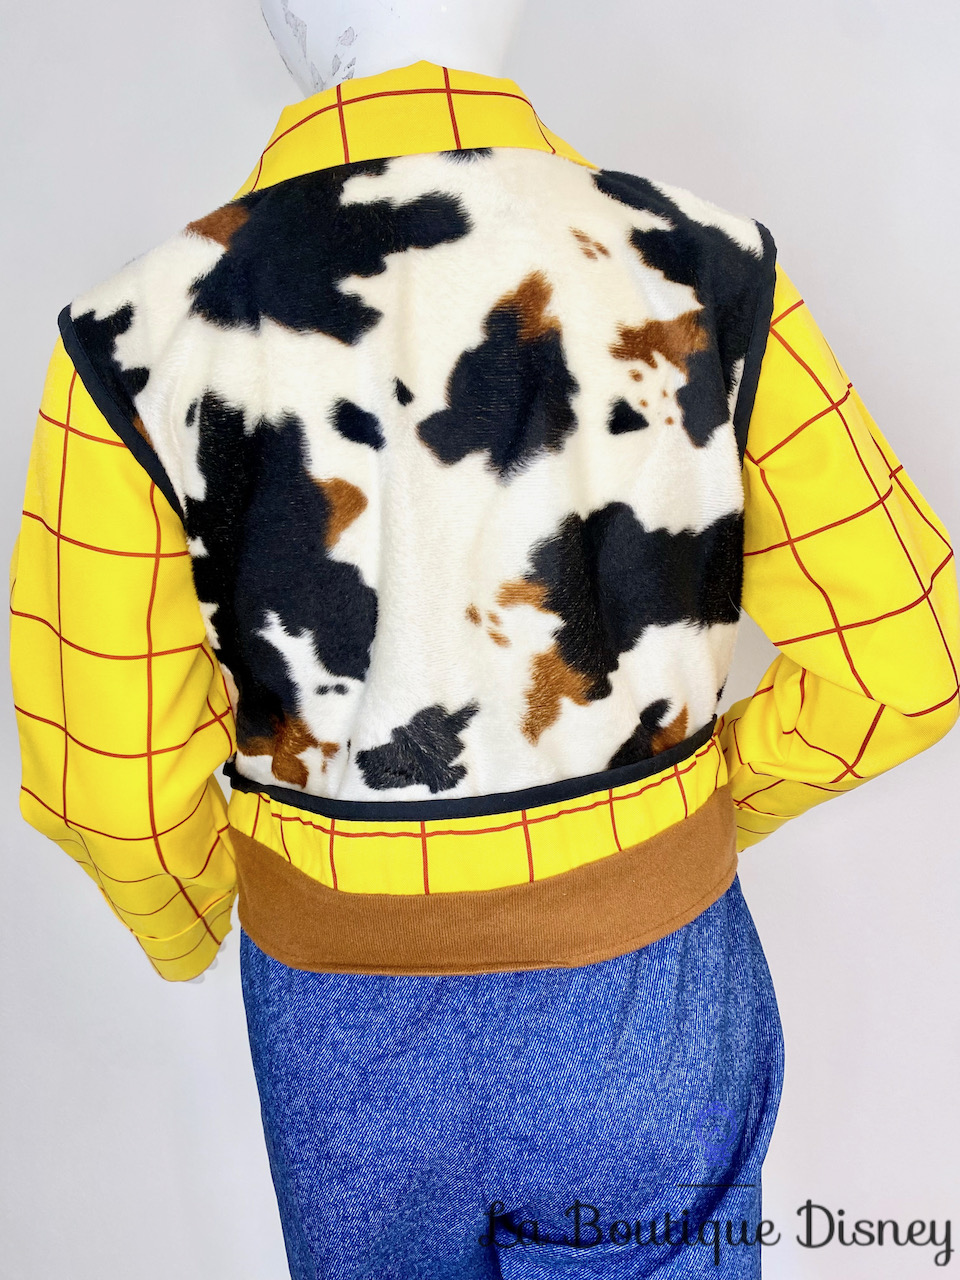 déguisement-woody-toy-story-disney-store-exclusive-cow-boy-chapeau-6